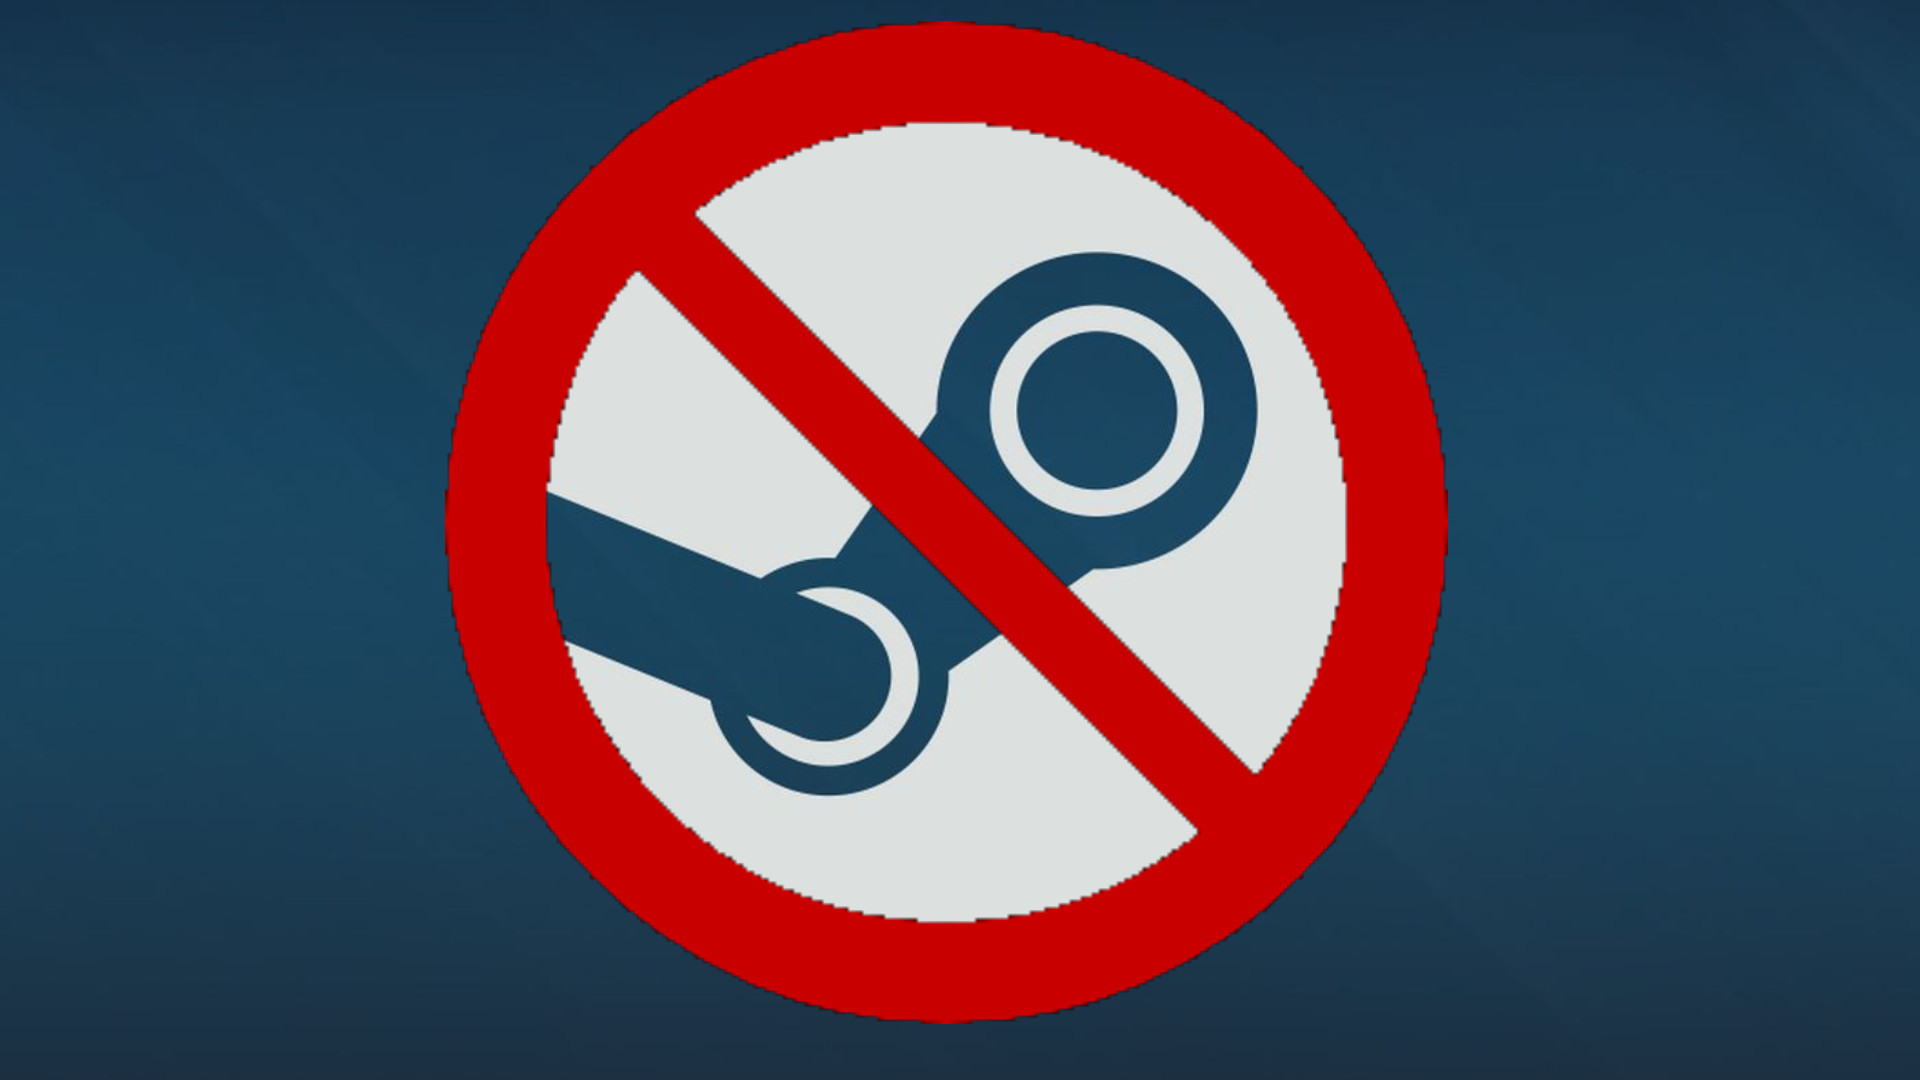 Steam blocked in Indonesia alongside Epic Games and Origin